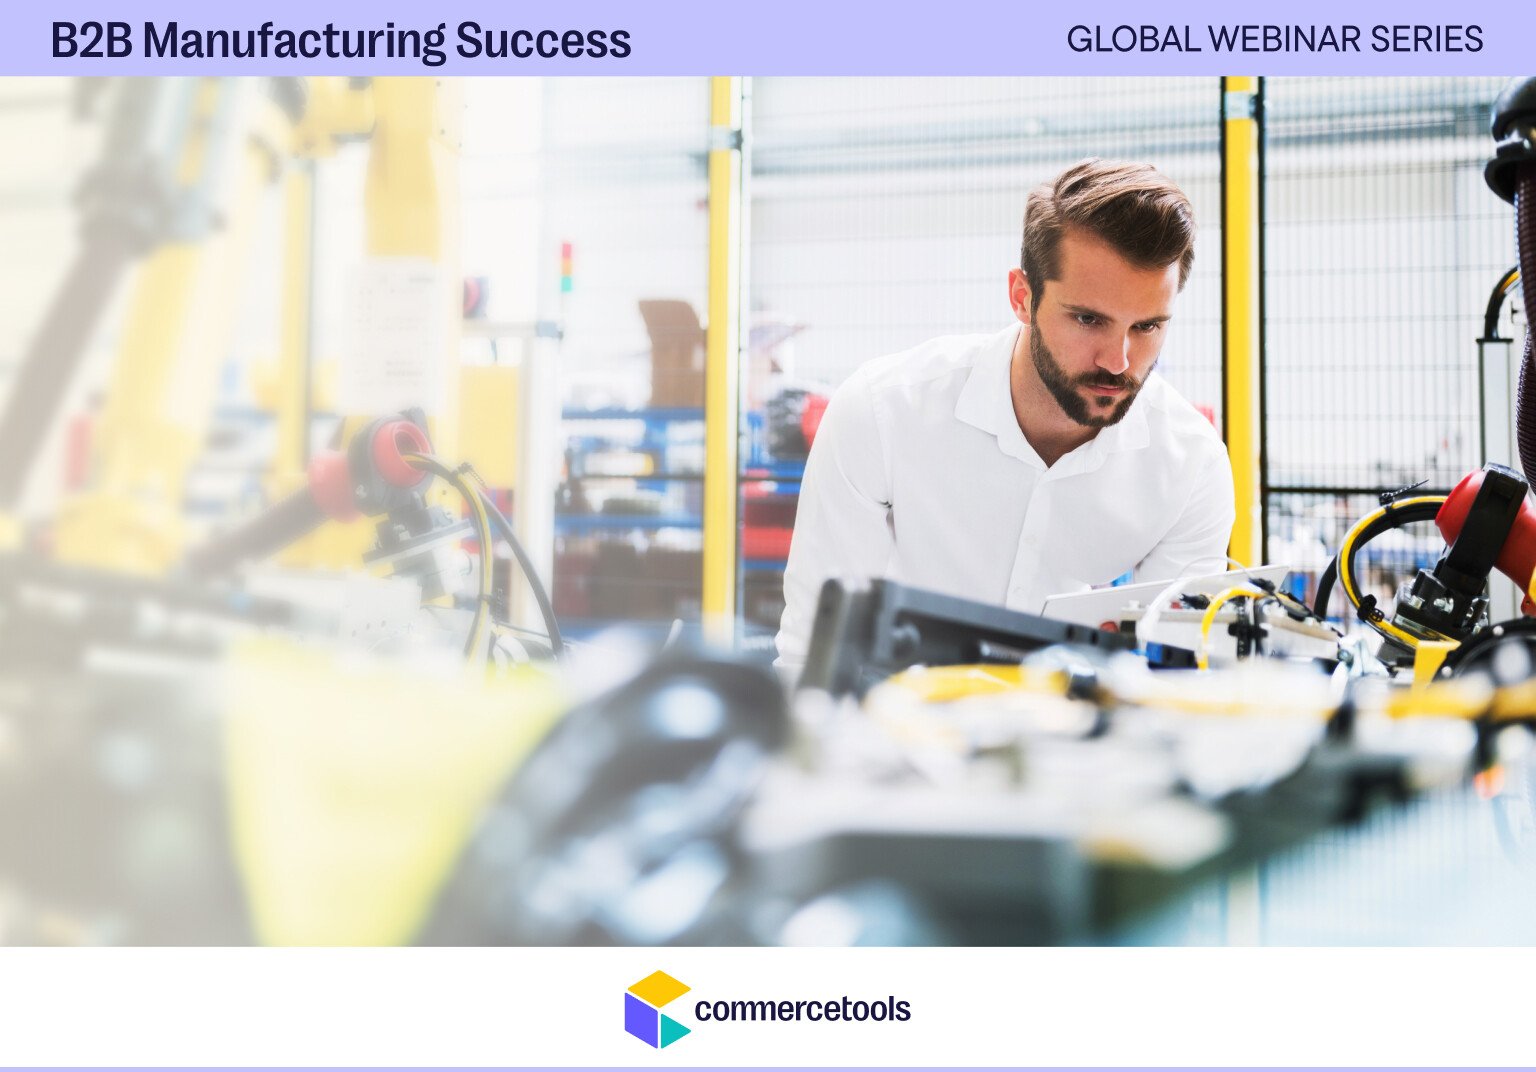 Join our webinar, Accelerating B2B Manufacturing Success Webinar with Composable Commerce: The Benefits of Speed, Scale and Flexibility.